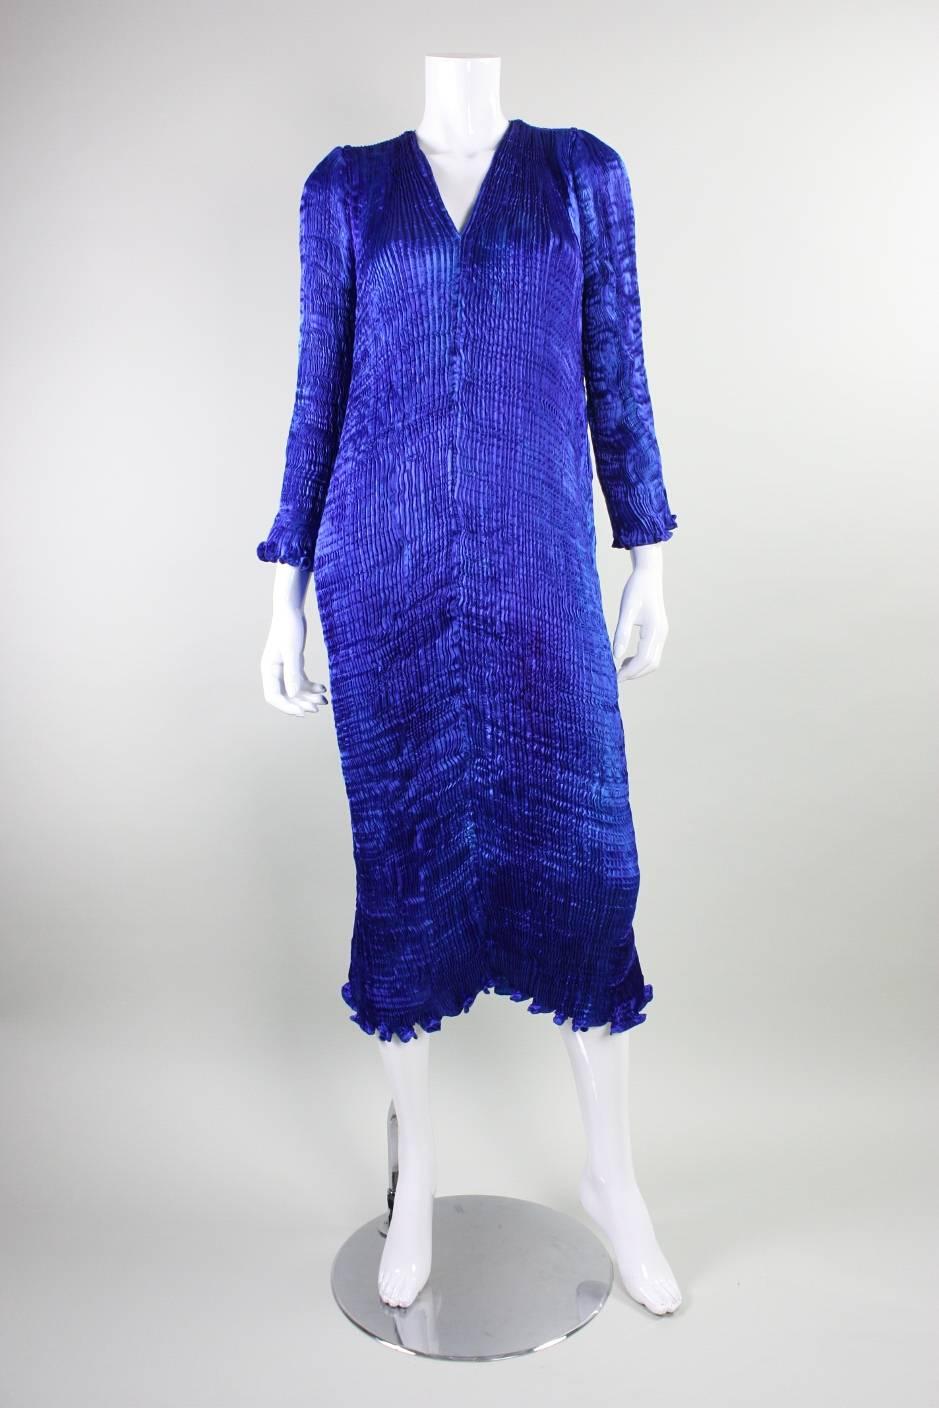 Elegant vintage dress from Patricia Lester likely dates from the 1980's through the 1990's and retailed at Saks Fifth Avenue.  It is made of pleated silk that is hand-dyed in various shades of blue, the most prominent of which is a deep cobalt. 